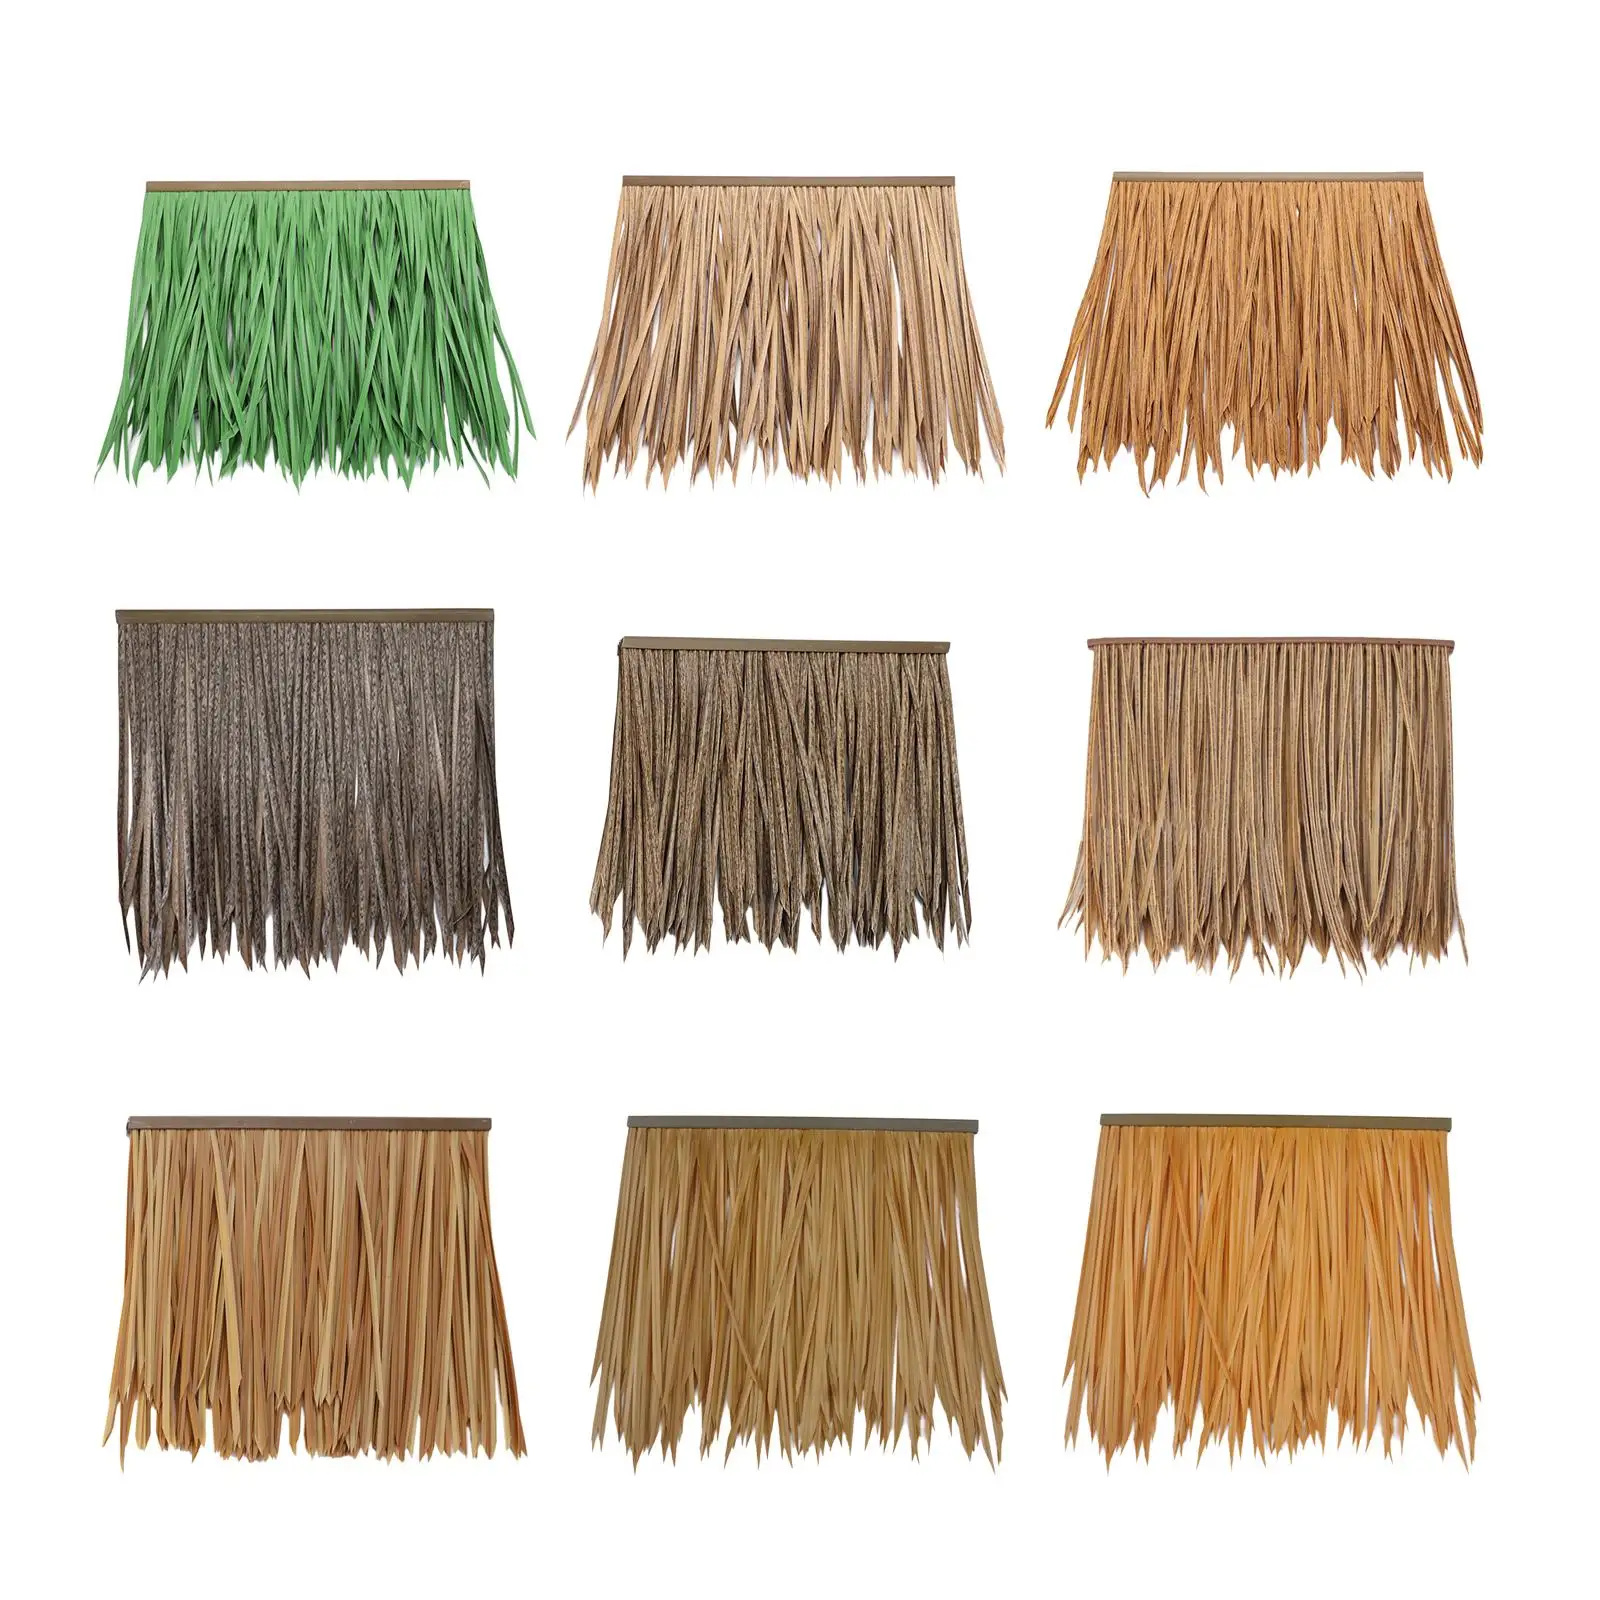 Straw Roof Thatch Devices Ceiling Easy to Use Centerpiece Multifunction Panel Palm Thatch Roll for Garden Pavilion Bar House Hut